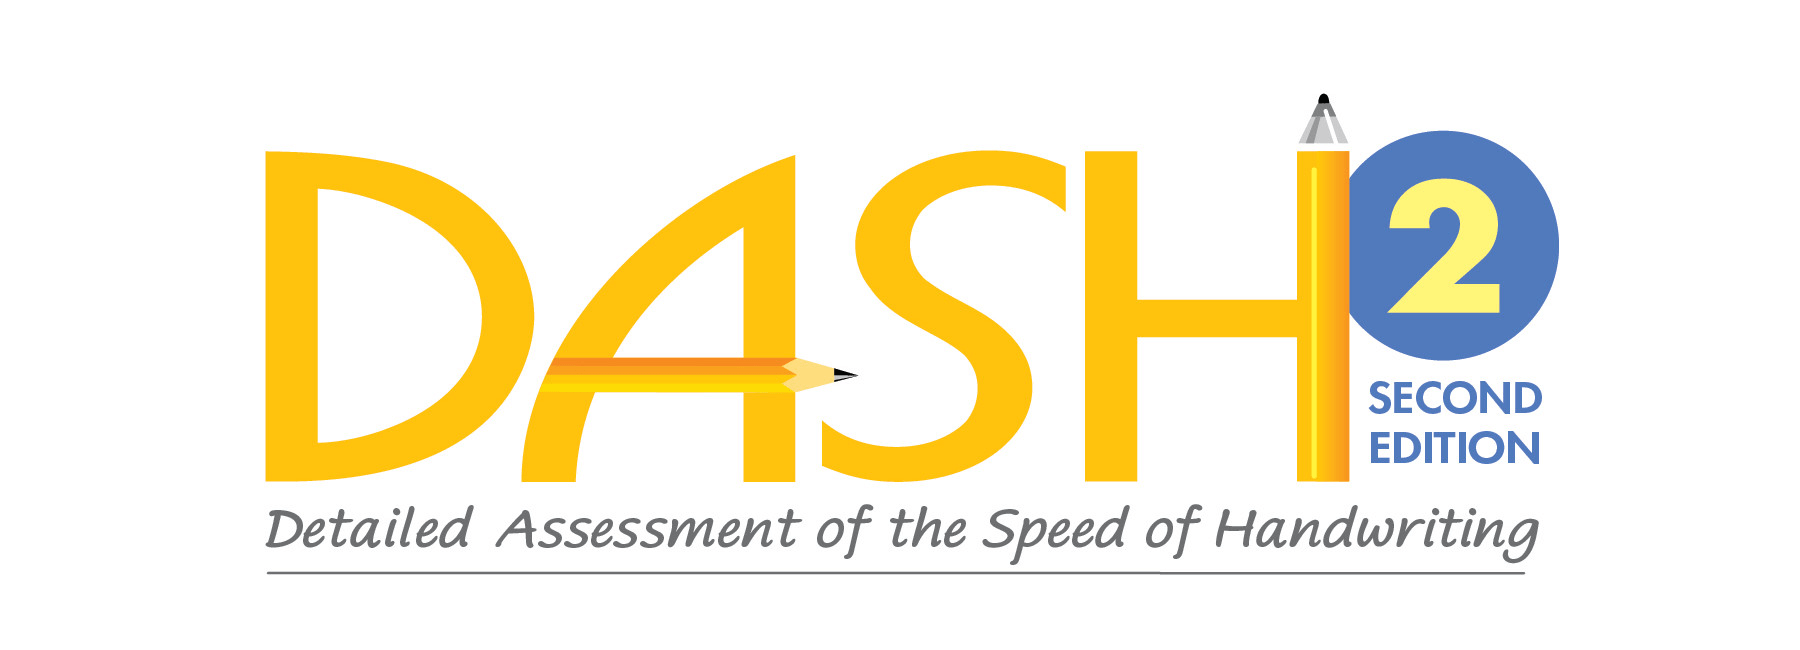 Detailed Assessment of Speed of Handwriting, 2nd Edition (DASH2)